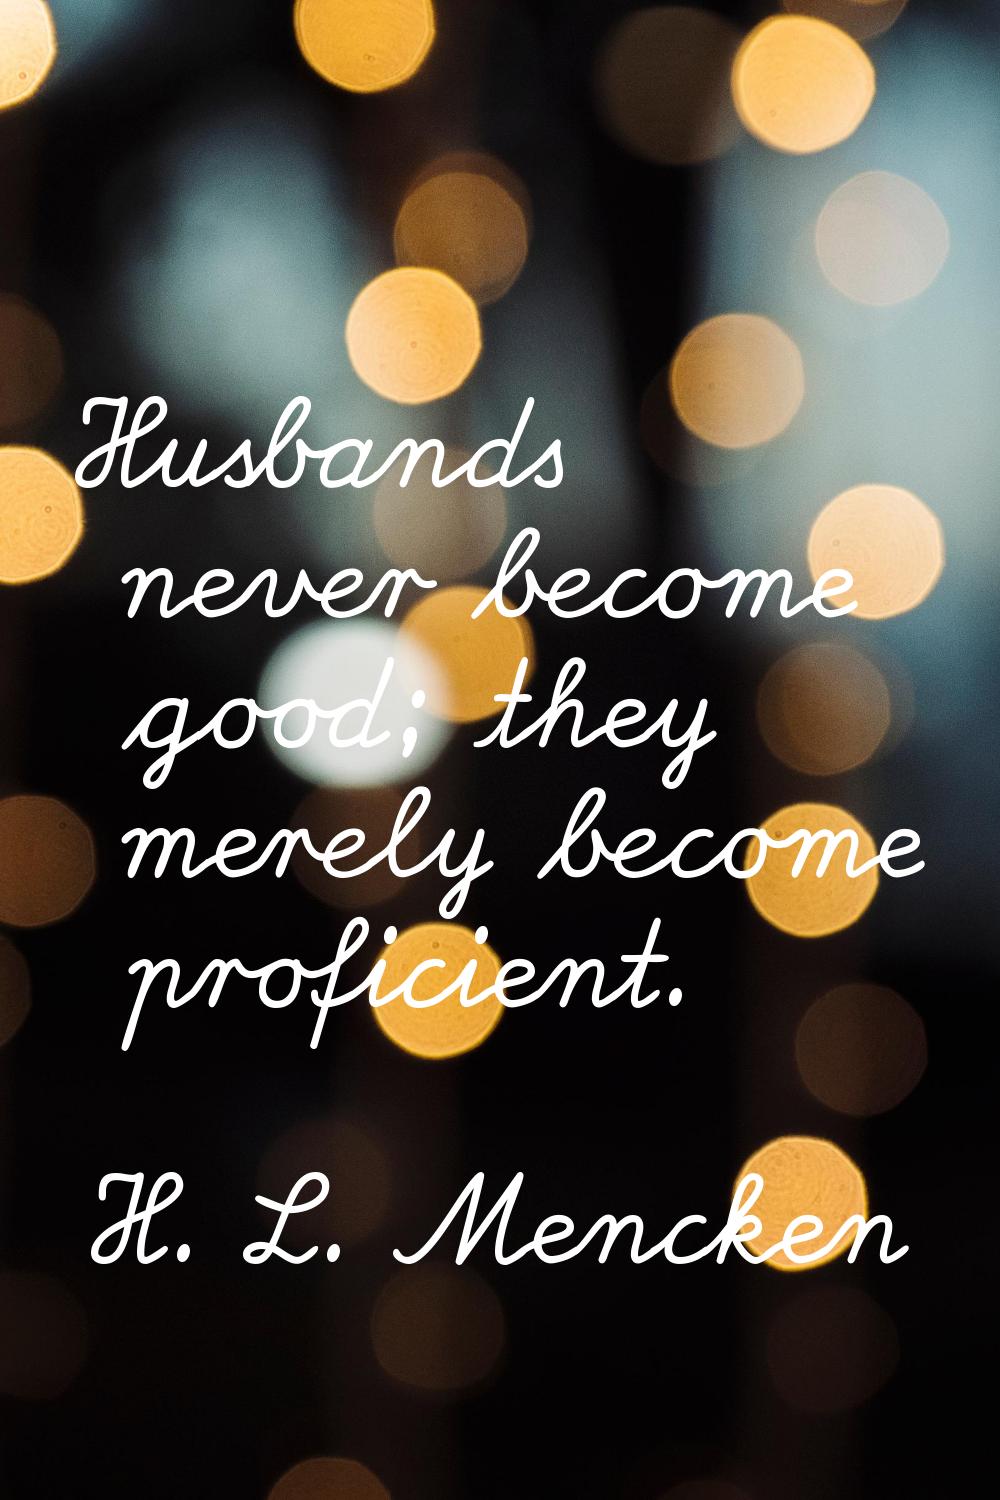 Husbands never become good; they merely become proficient.